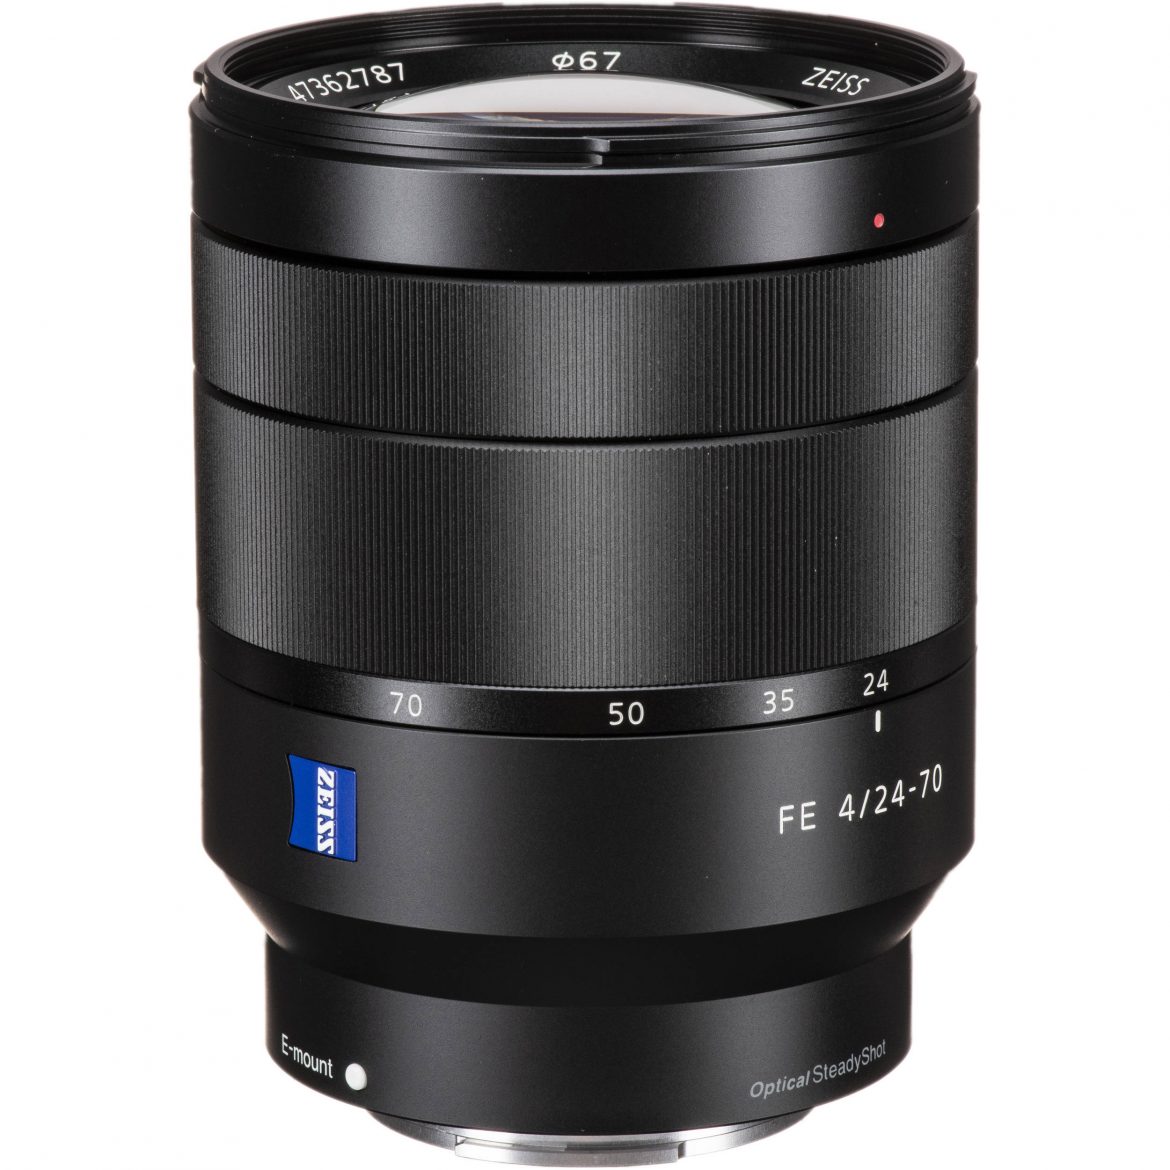 Sony Zeiss 24-70 f4 review